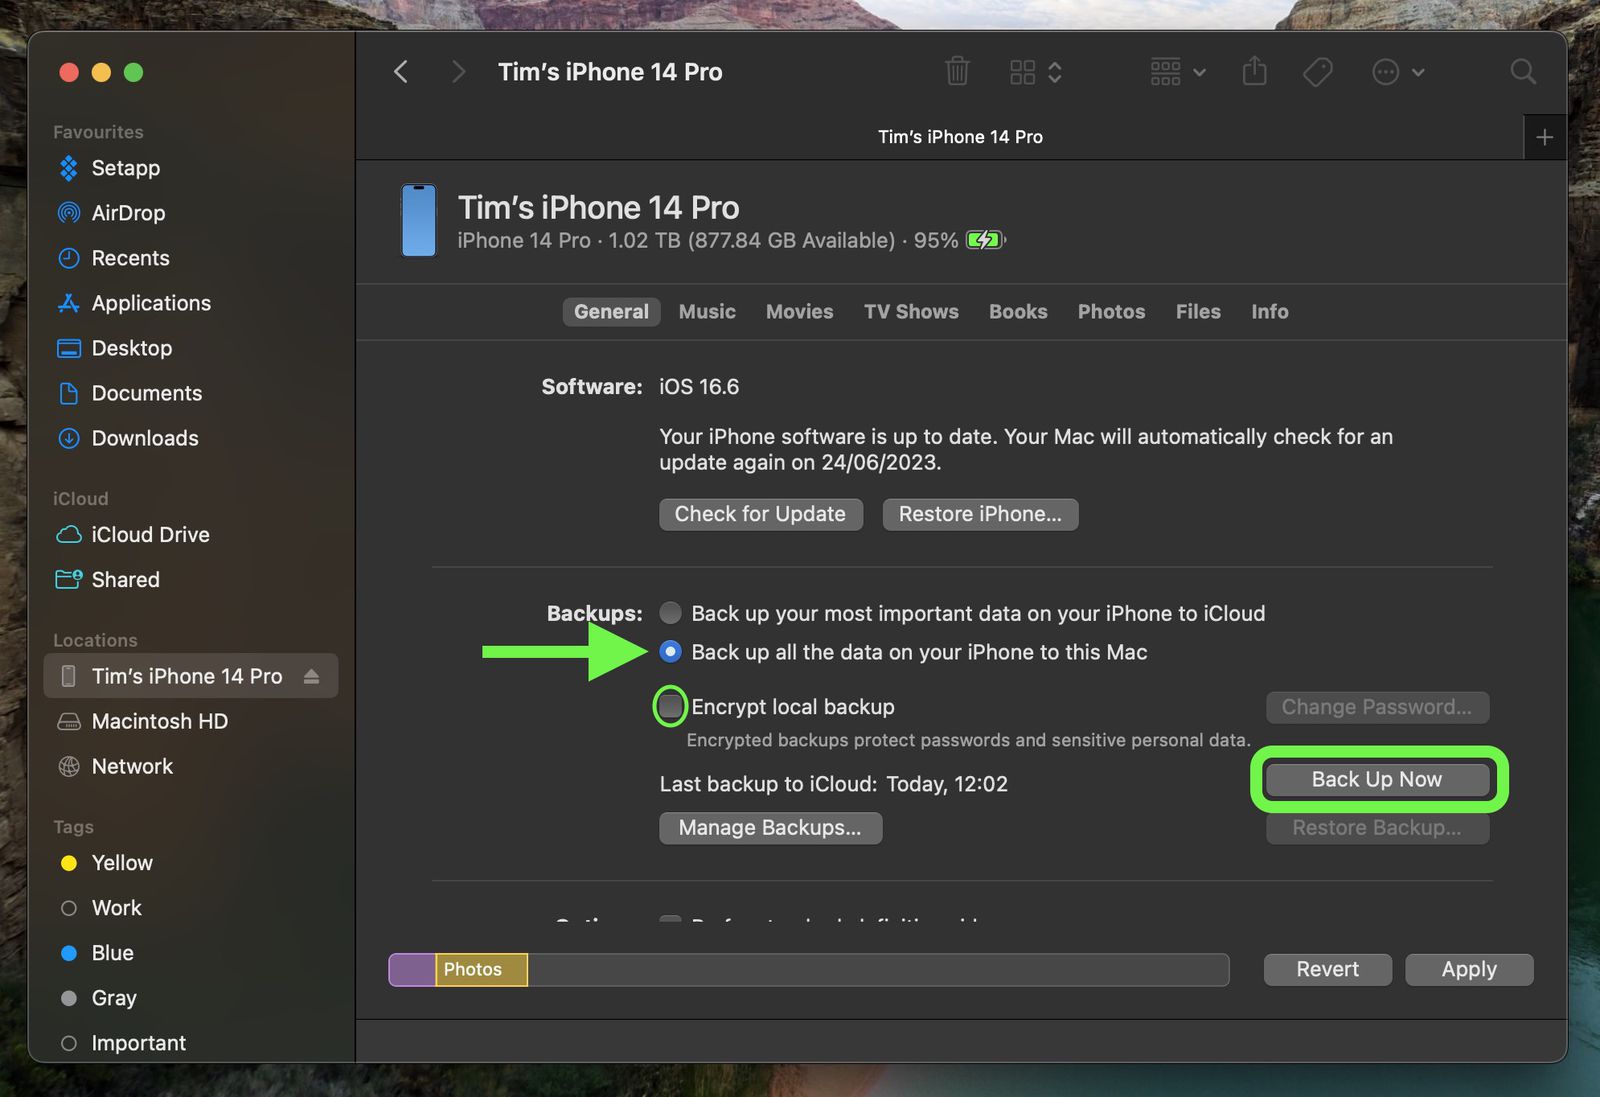 How to Download Spotify on Mac